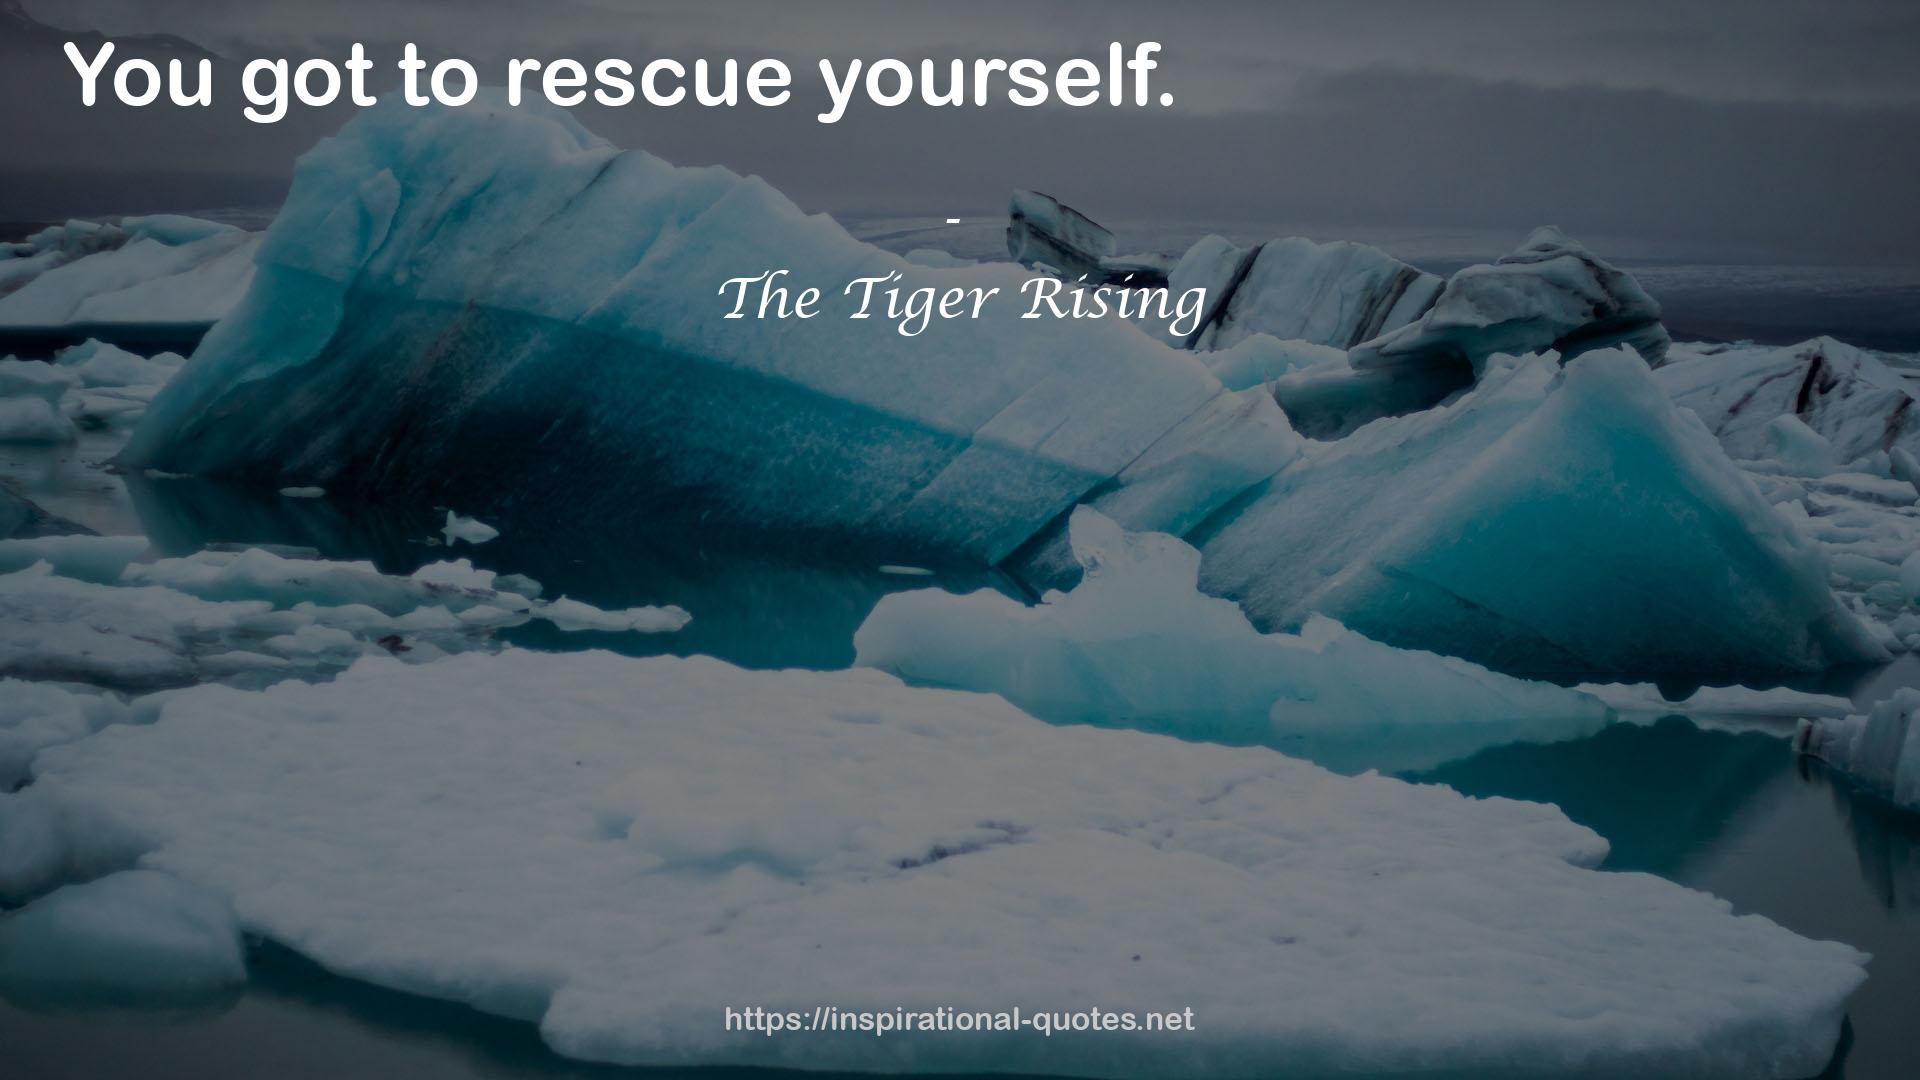 The Tiger Rising QUOTES